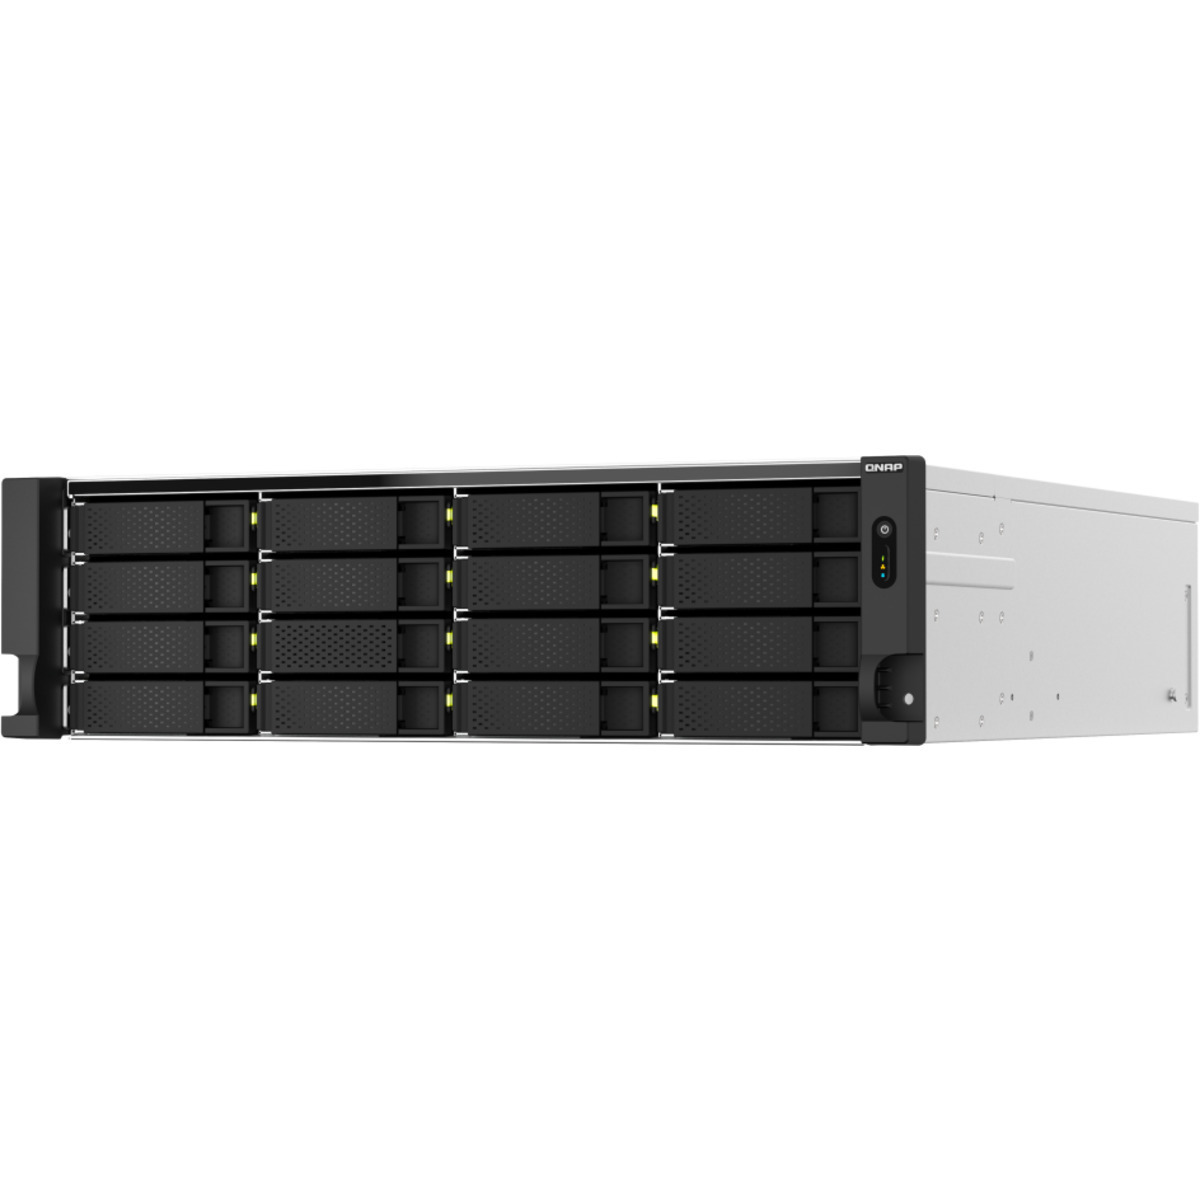 QNAP TS-h2287XU-RP E-2336 QuTS hero Edition 360tb 16+6-Bay RackMount Large Business / Enterprise NAS - Network Attached Storage Device 15x24tb Seagate IronWolf Pro ST24000NT002 3.5 7200rpm SATA 6Gb/s HDD NAS Class Drives Installed - Burn-In Tested TS-h2287XU-RP E-2336 QuTS hero Edition